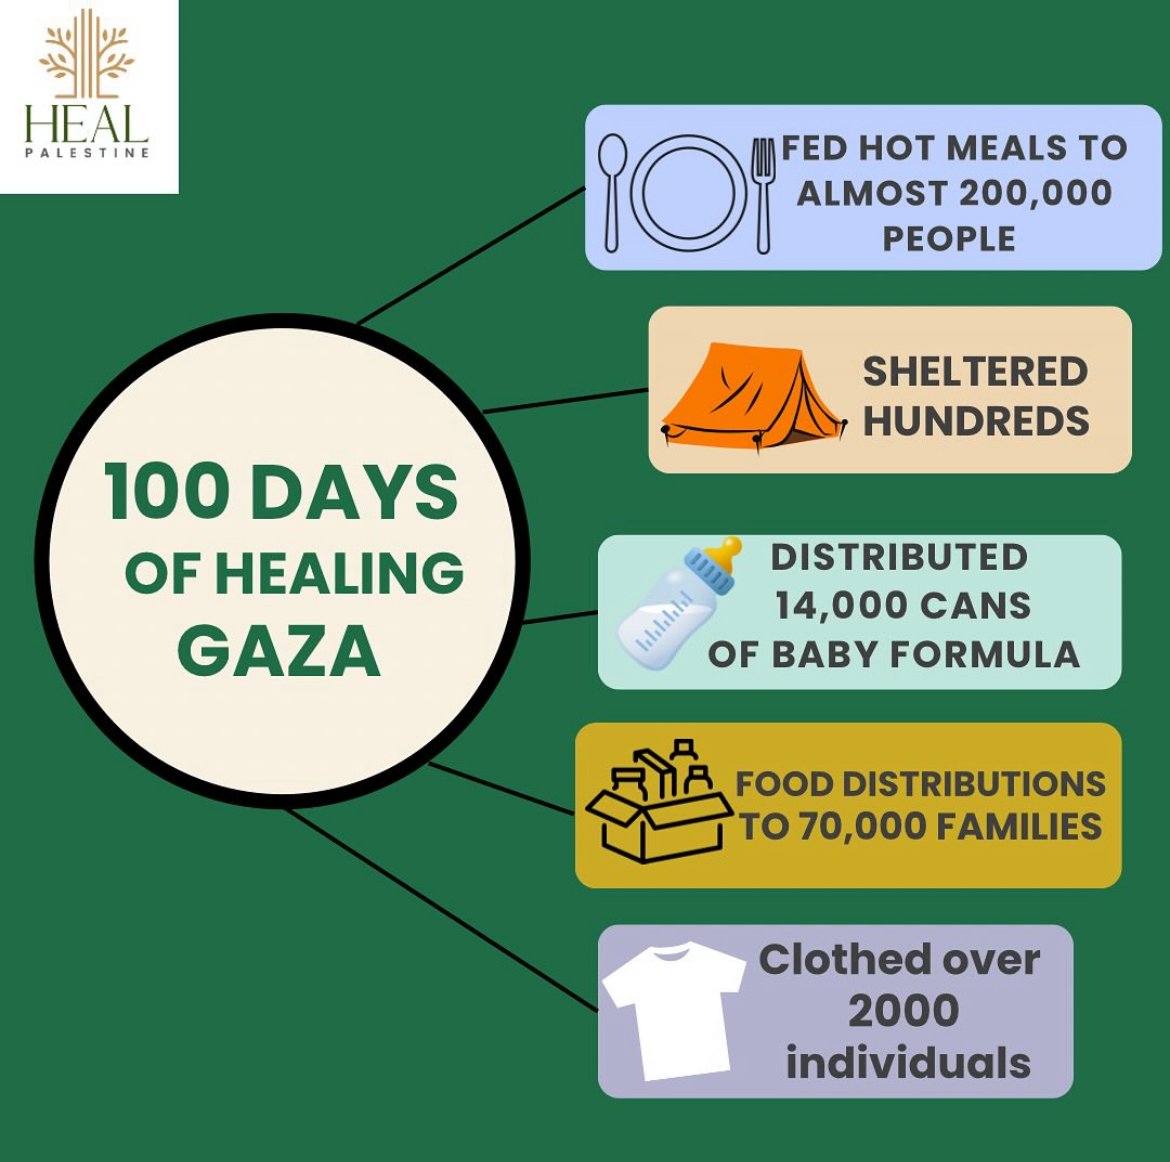 We've only existed for 100 days, but we serve the children of Gaza with full effort and determination. You can join us by visiting: healpalestine.org